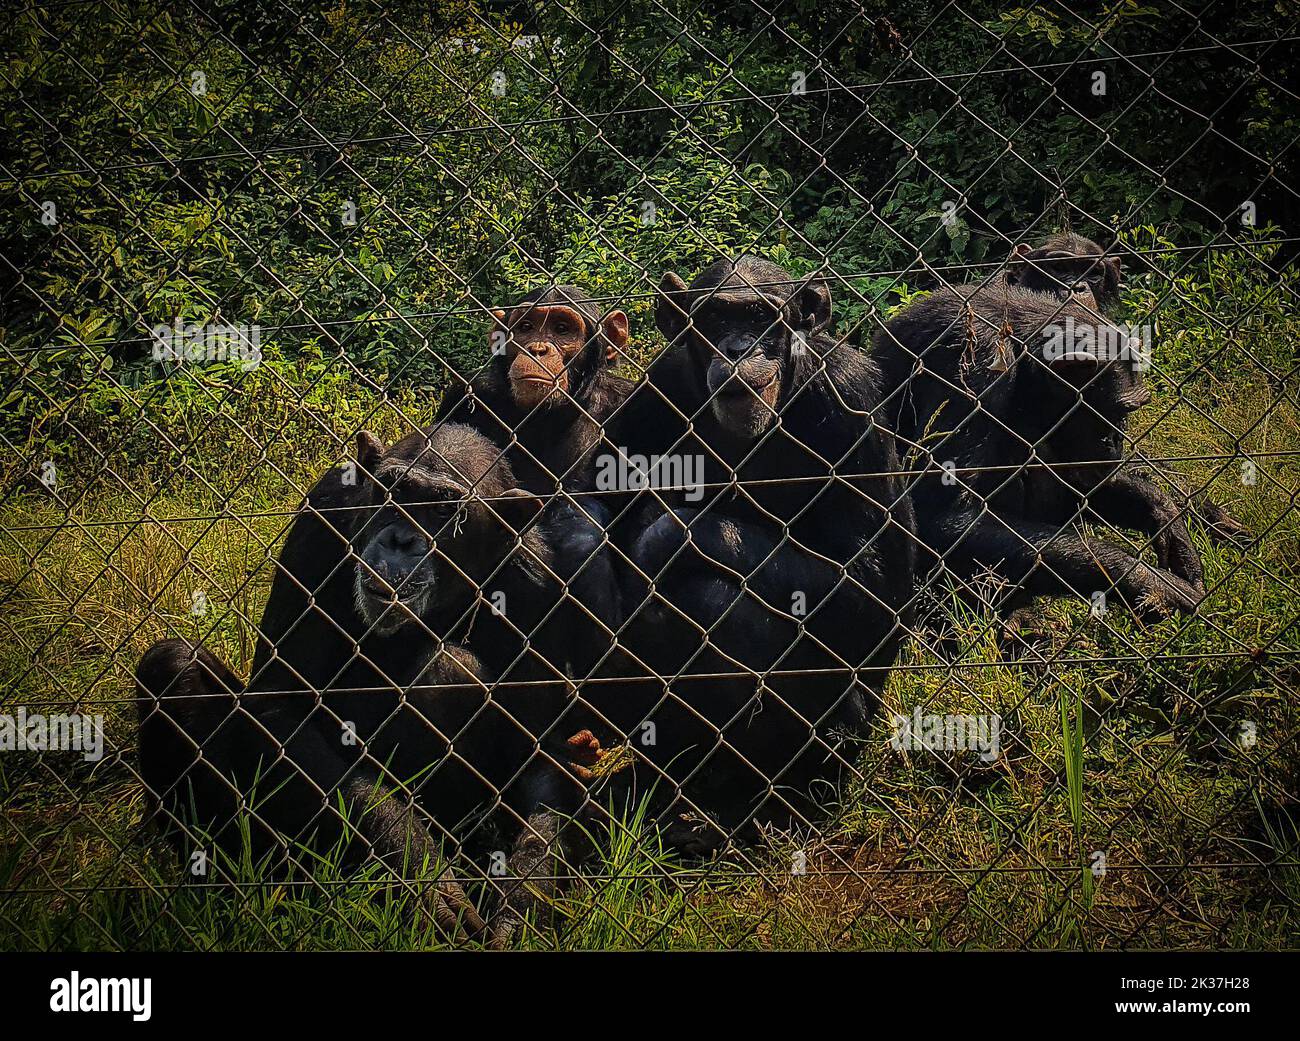 (220925) -- GOMA, Sept. 25, 2022 (Xinhua) -- Photo taken on Aug. 27, 2022 shows gorillas at the Virunga National Park in the northeastern Democratic Republic of the Congo (DRC). TO GO WITH 'Feature: Gorillas in NE DRC under shadow of war' (Str/Xinhua) Stock Photo